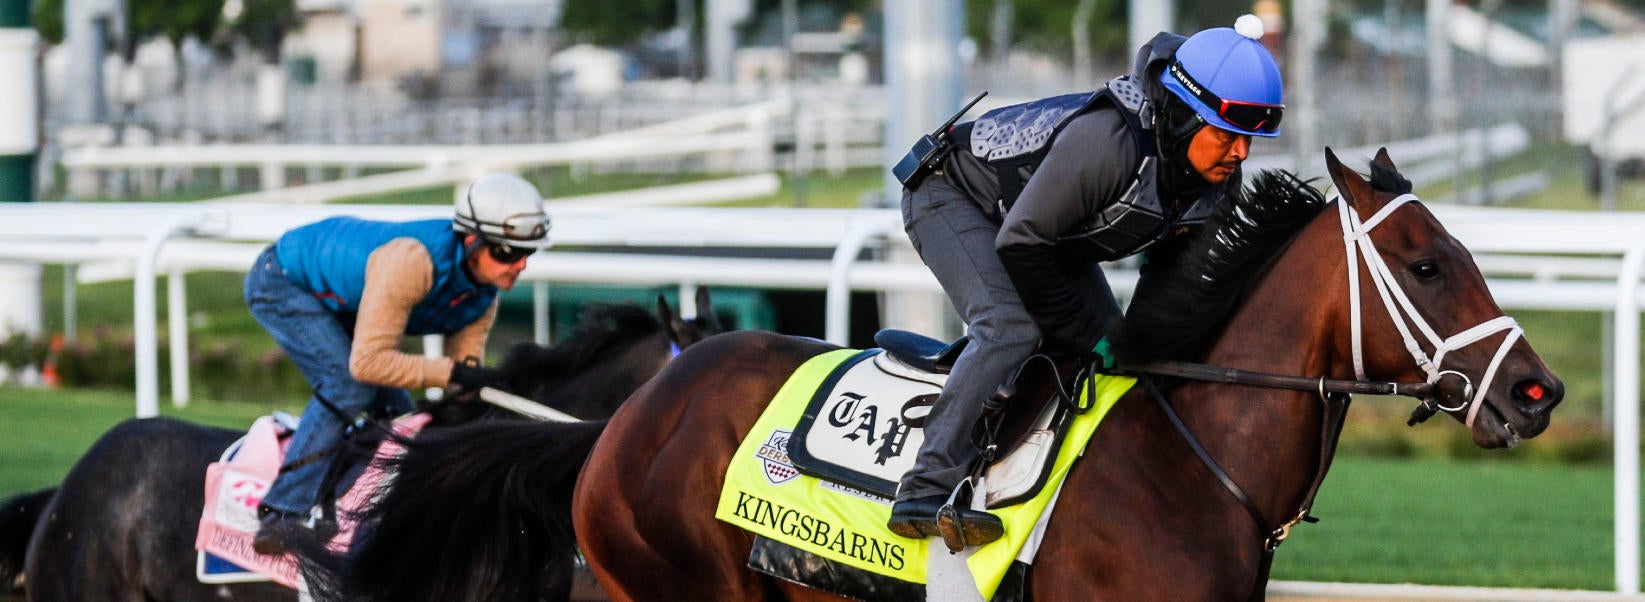 Kingsbarns profile 2023 Kentucky Derby odds, post position, history